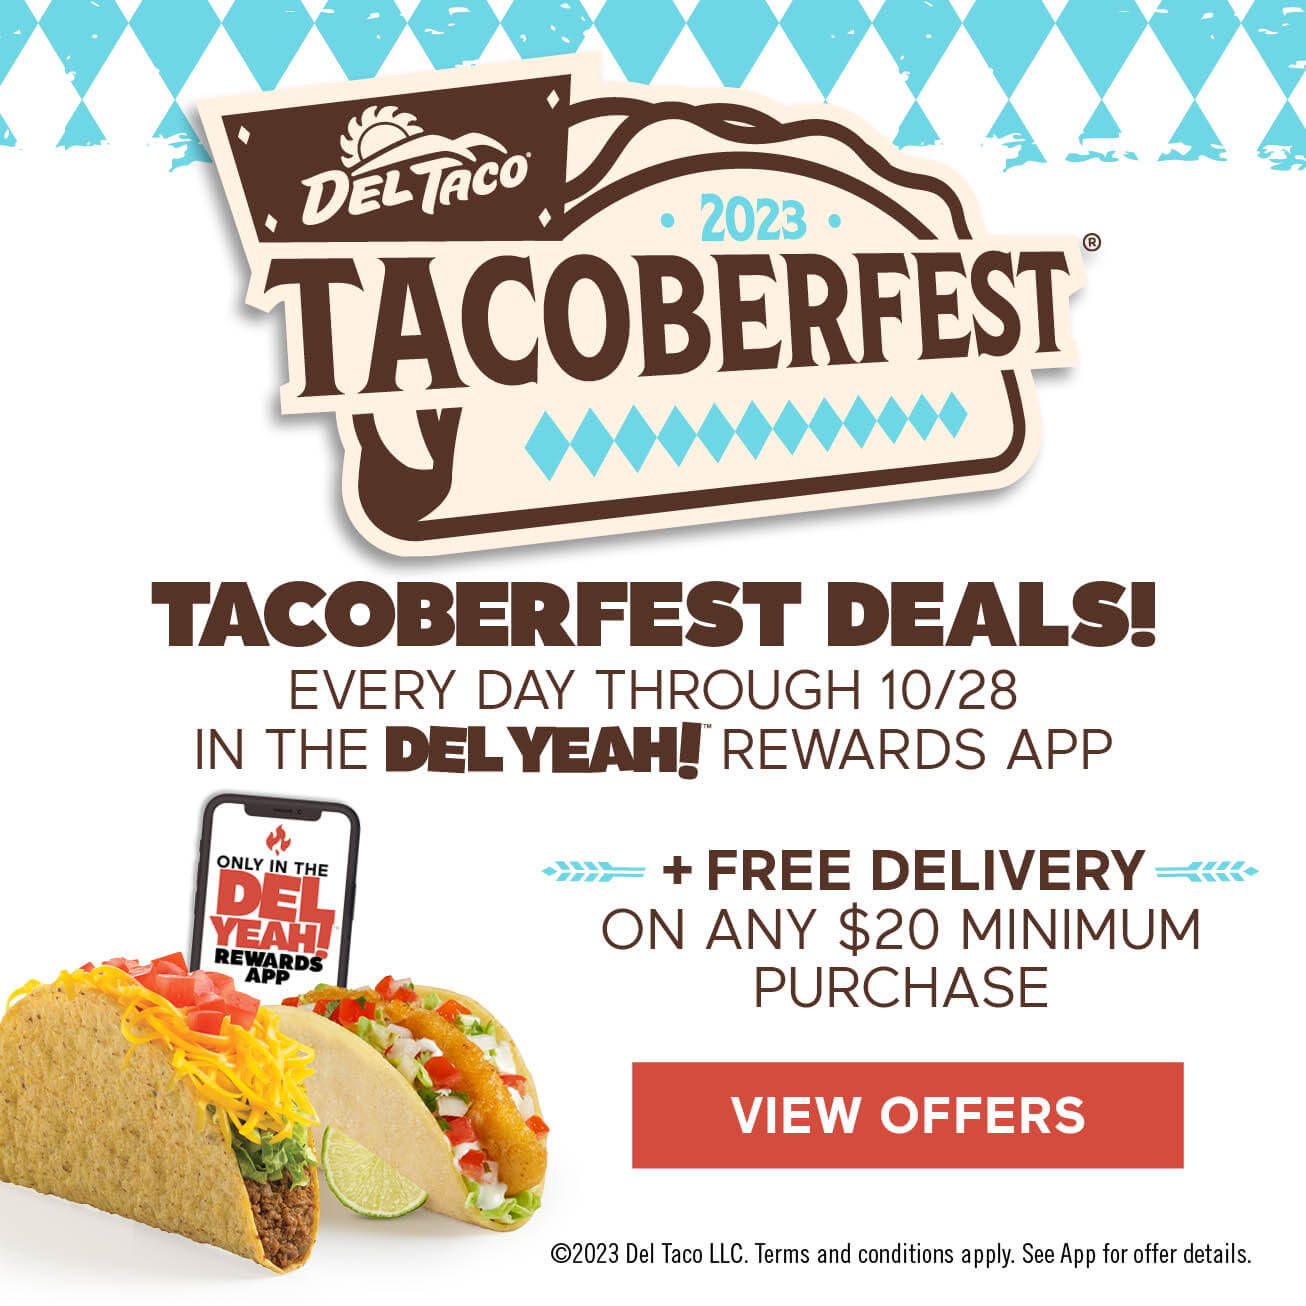 Tacoberfest Deals! Every day through 10/28 in the Del Yeah! Rewards App. Click to view offers.